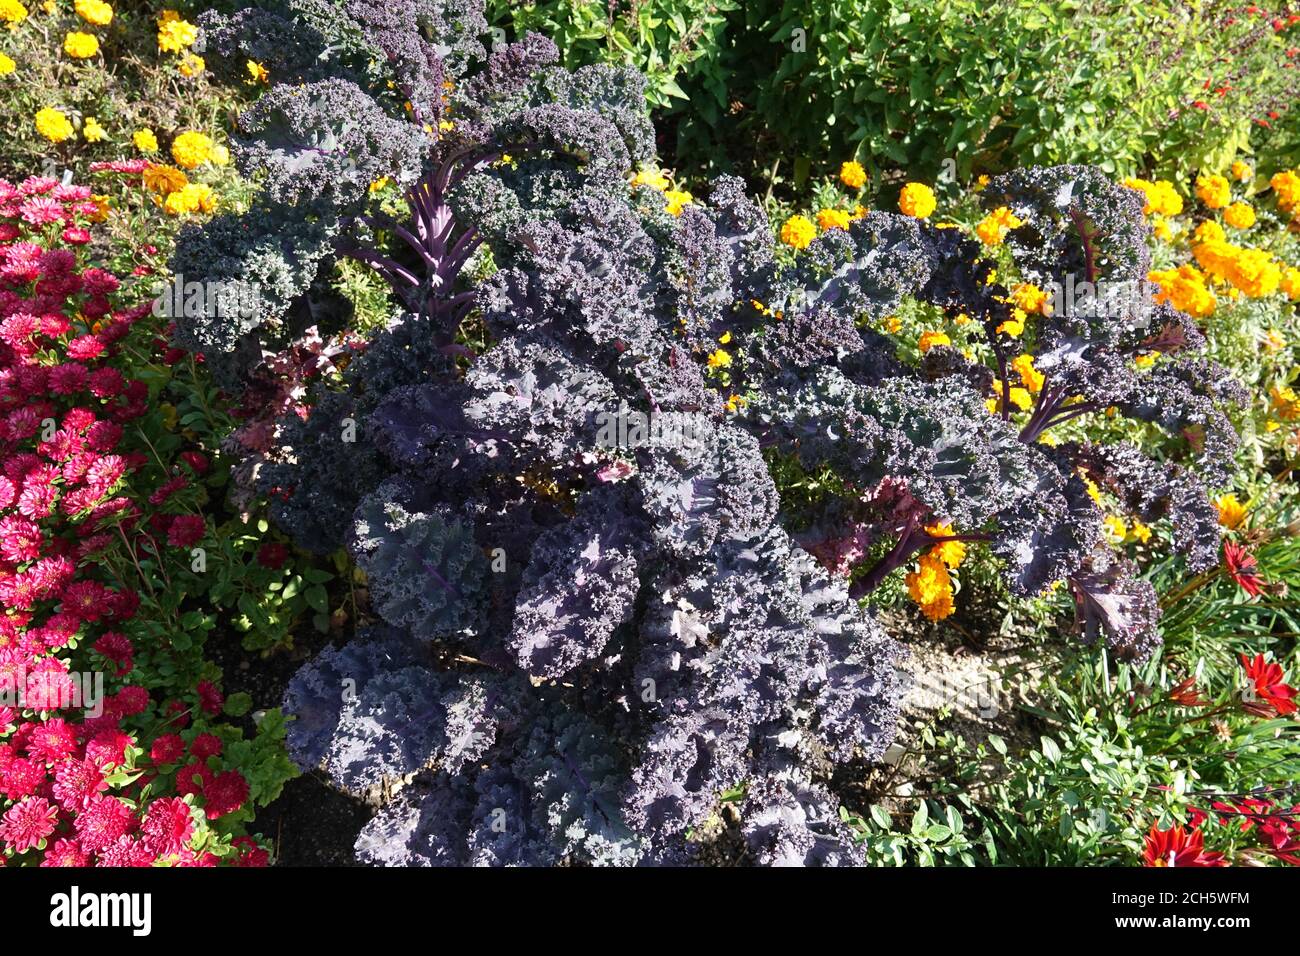 Decorative Purple Kale Brassica oleracea 'Redbor' Flowerbed Garden Border September Summer Flower bed Colourful Mixed Plants Colorful Flowers Cabbage Stock Photo